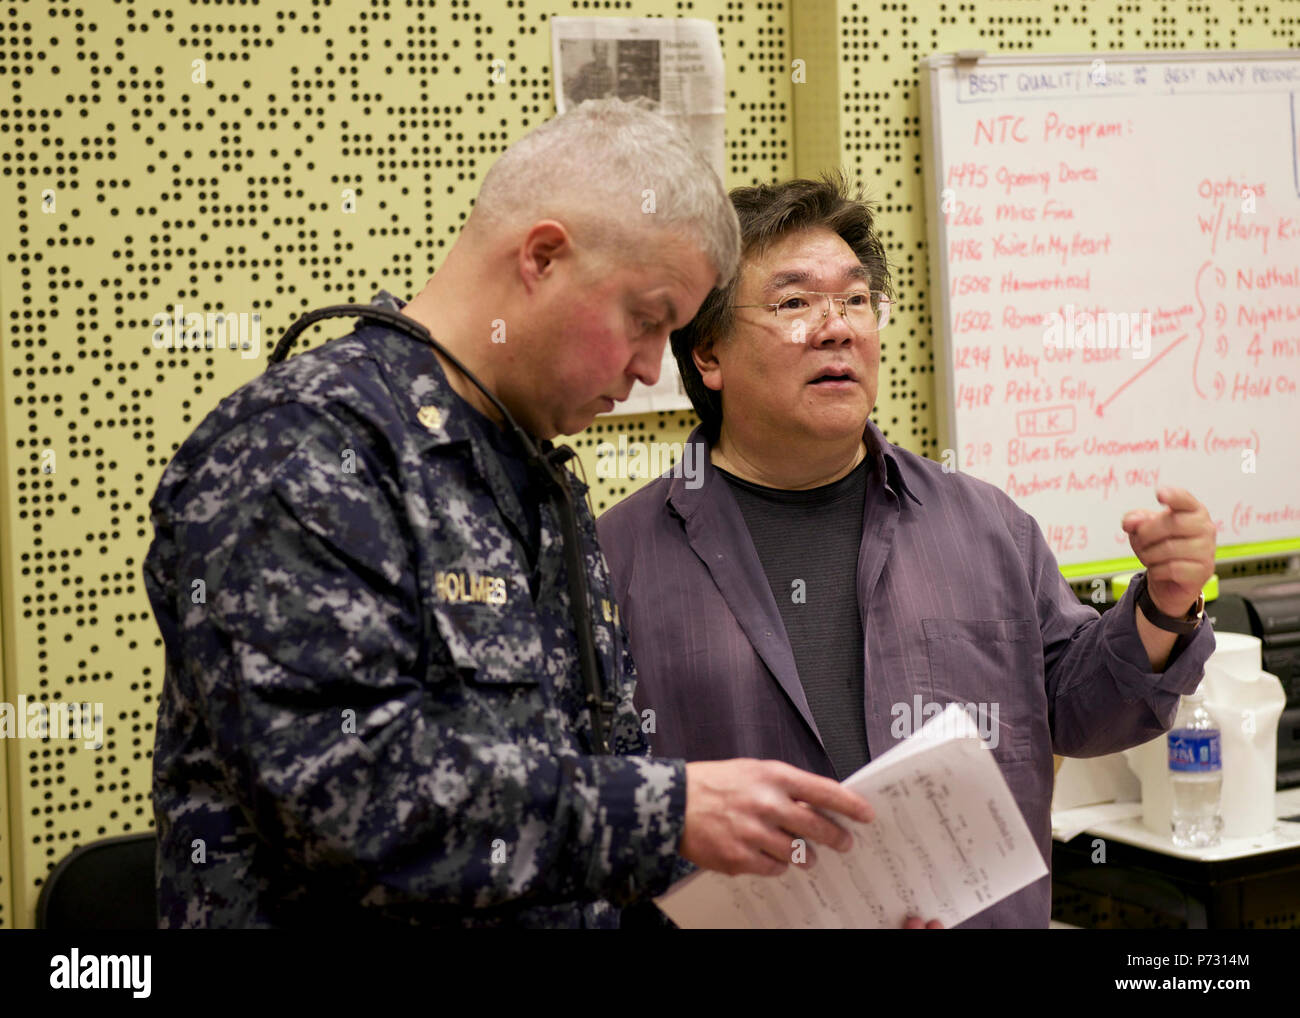 WASHINGTON (March 20, 2014) Trumpet artist Harry Kim, rehearsing with the U.S. Navy Band Commodores jazz ensemble, discusses music with Chief Musician Rob Holmes, of McLean, Va. Kim will join the Commodores for a special concert the National Trumpet Competition in Mechanicsburg, Pa. March 21. Stock Photo